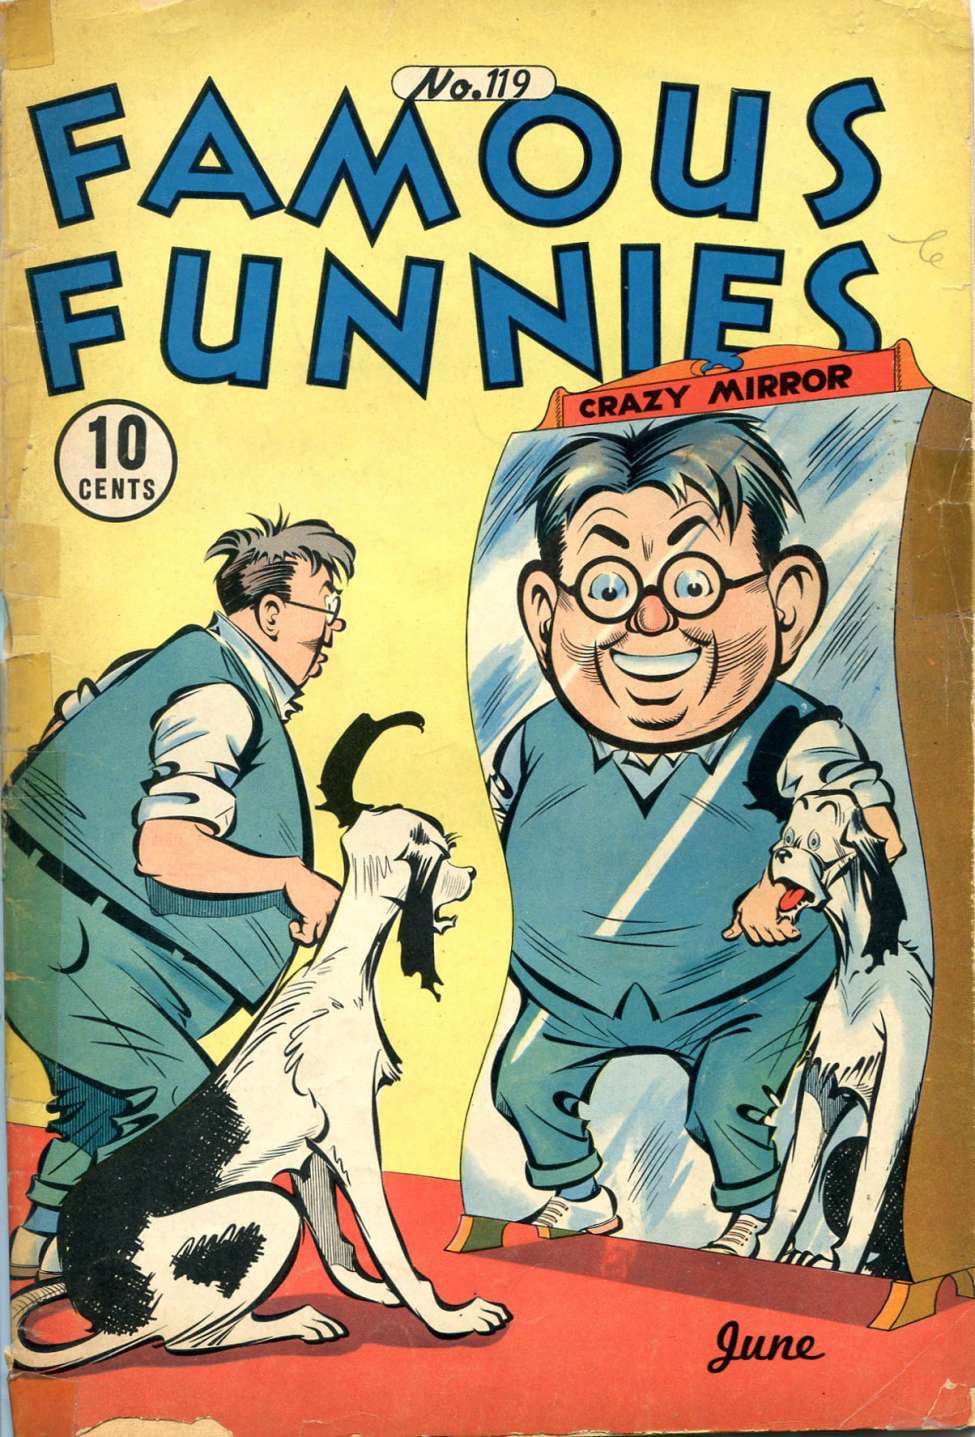 Book Cover For Famous Funnies 119